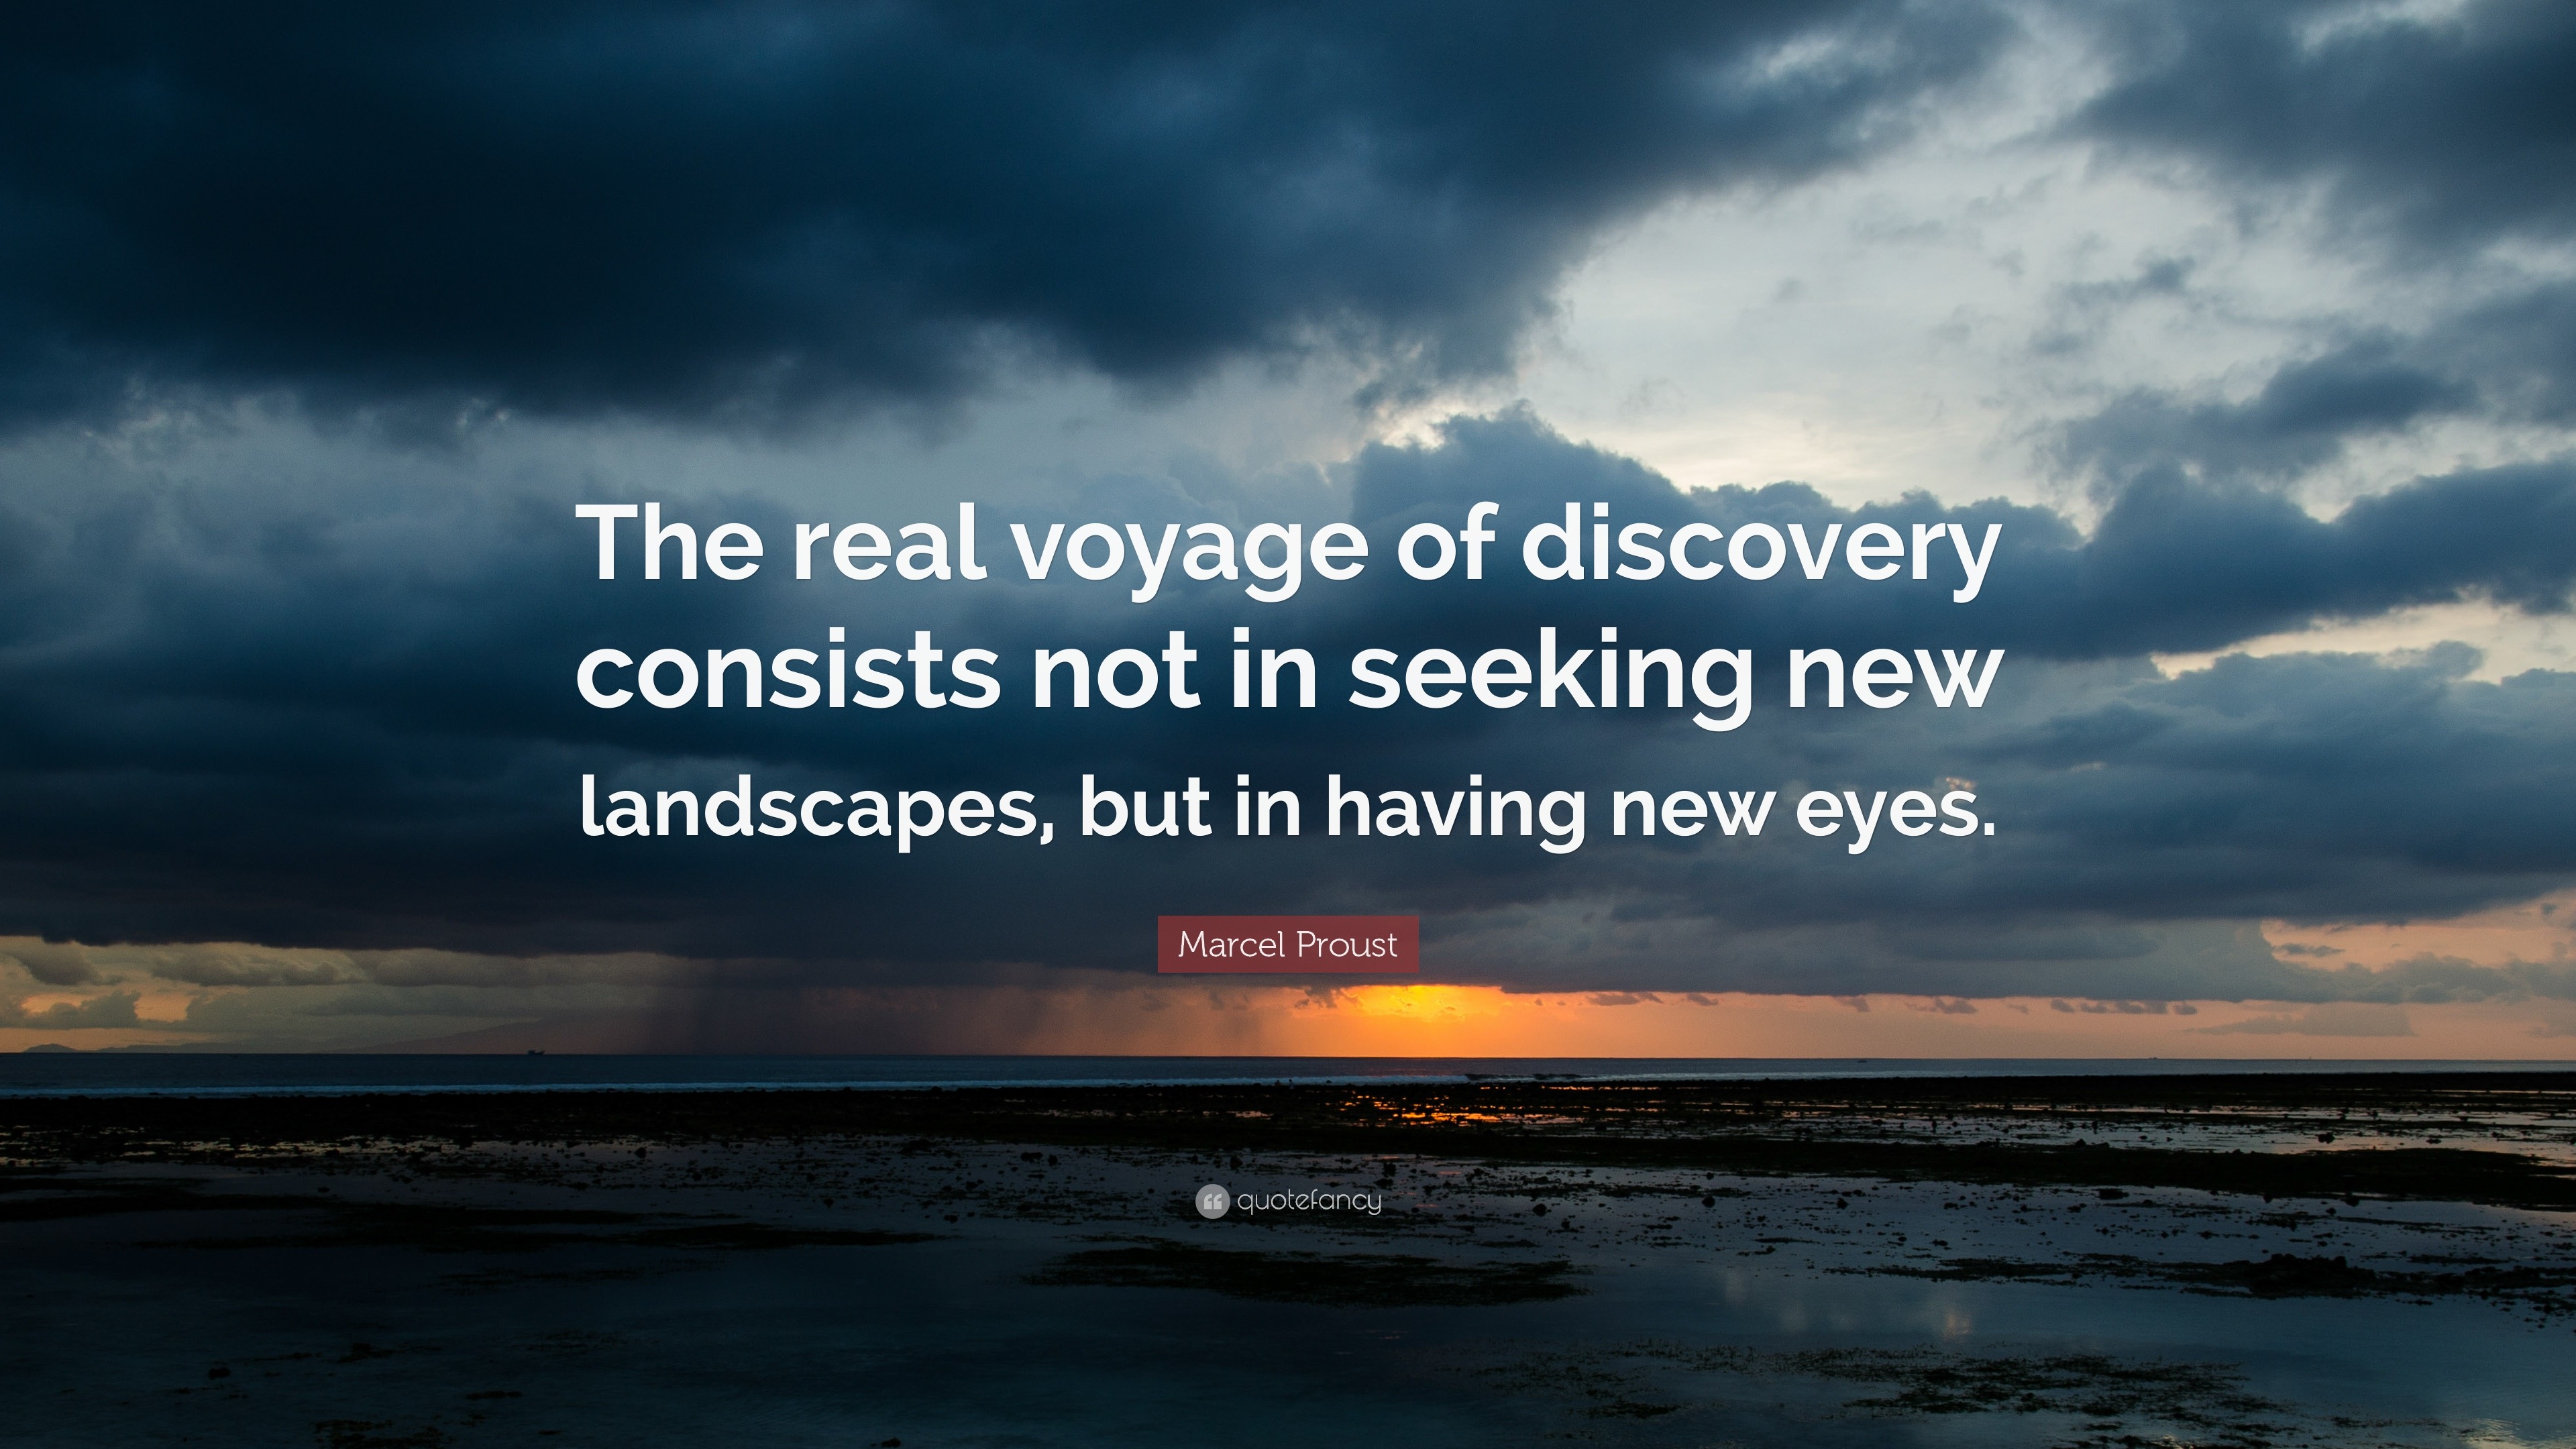 Marcel Proust Quote: “The real voyage of discovery consists not in